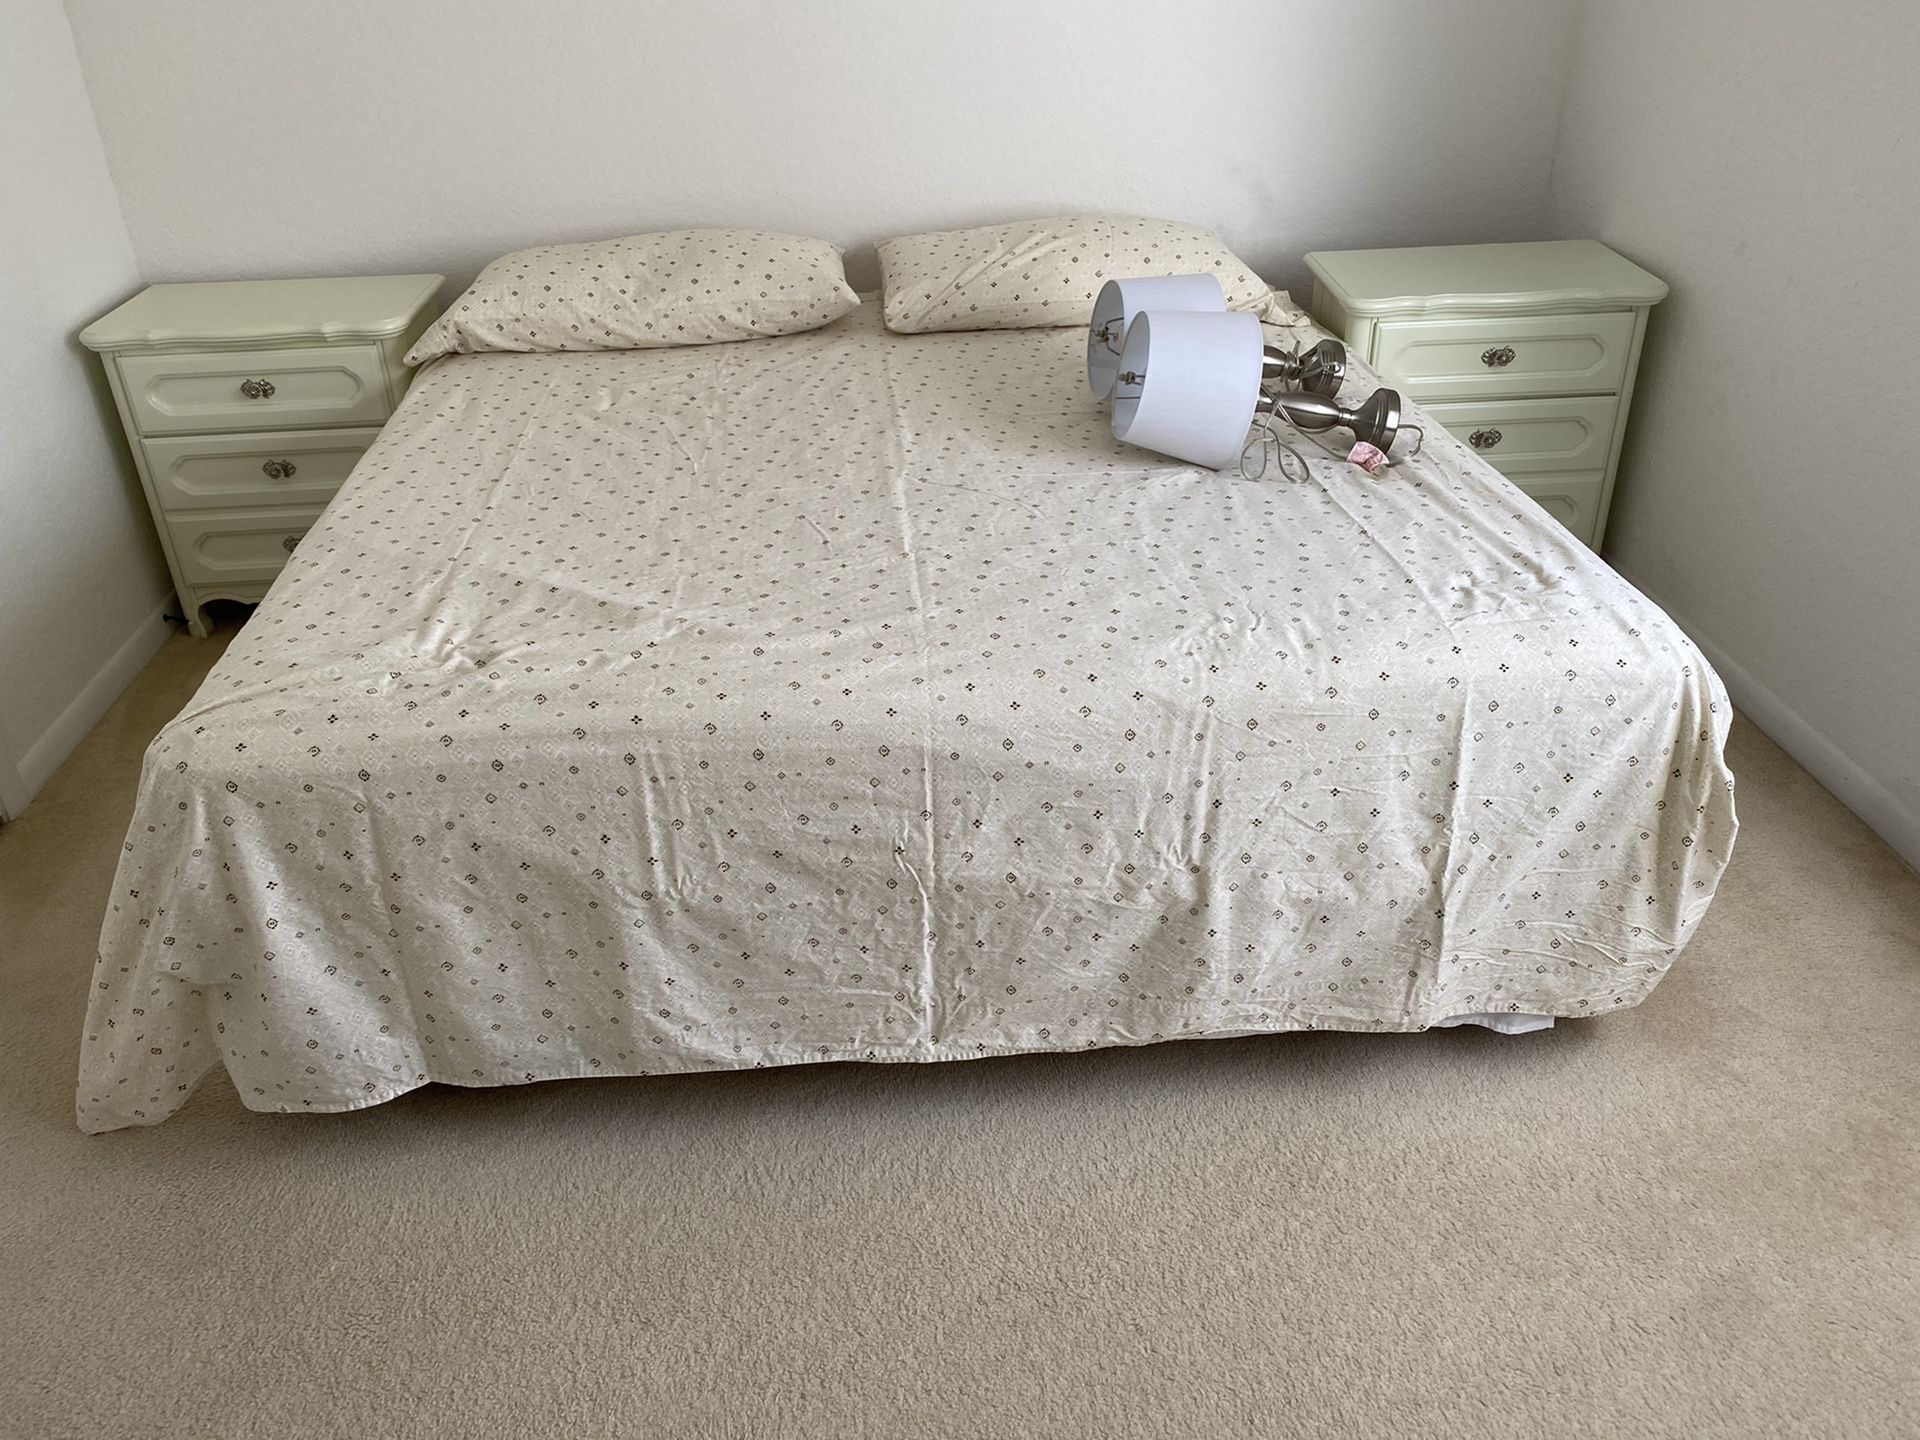 King size bed! (Mattress, box spring and frame!